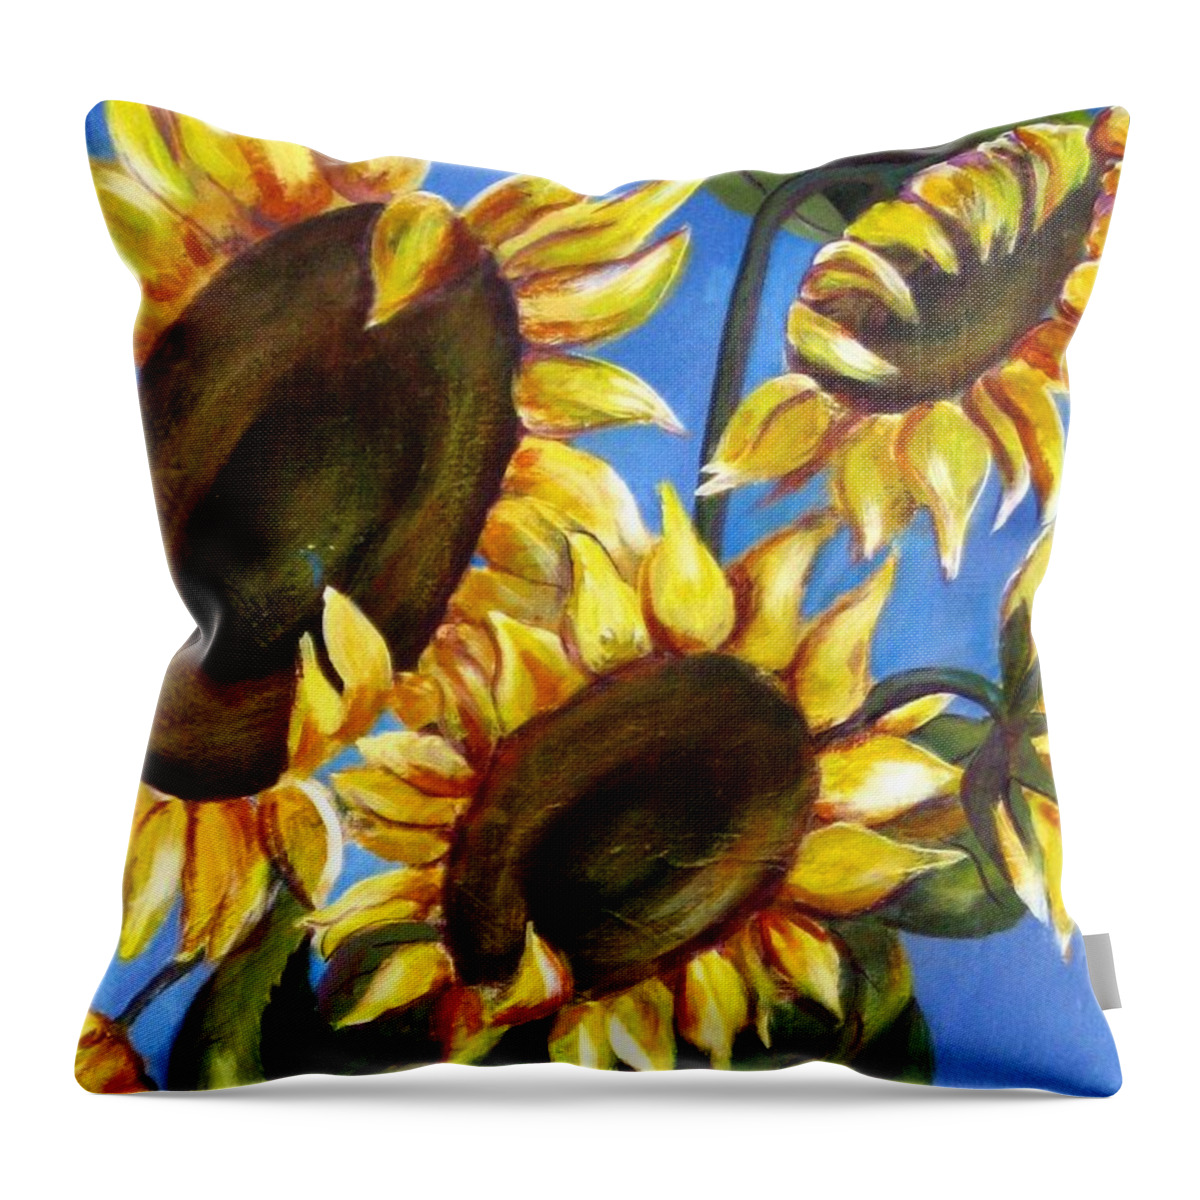 Flowers Throw Pillow featuring the painting Sunflowers by Melody Horton Karandjeff